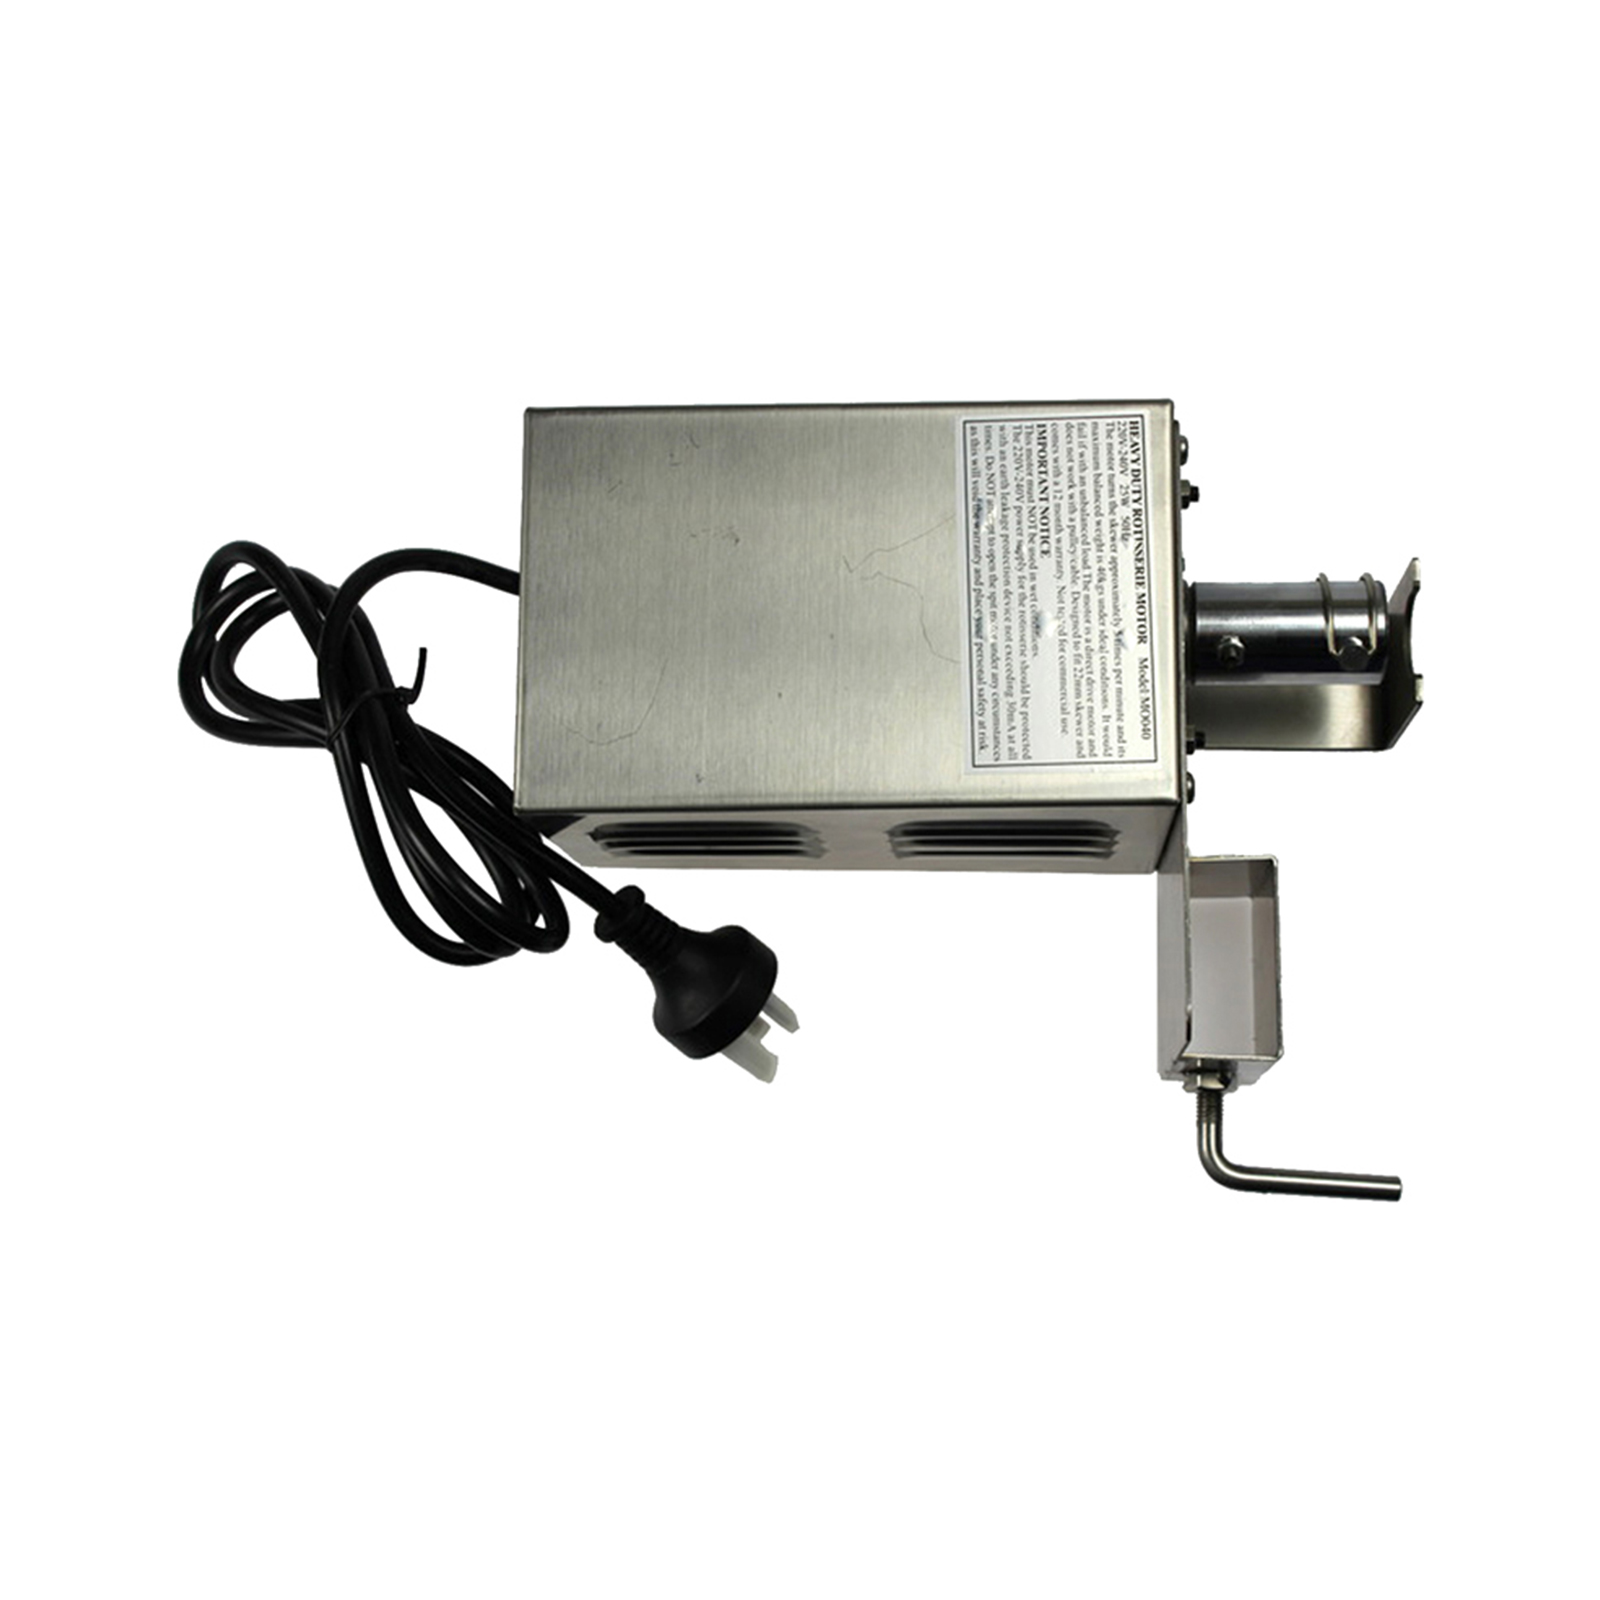 40kg Capacity 304 Grade Stainless Steel BBQ Spit Rotisserie Motor for Round Skewer from DIZZY LAMB